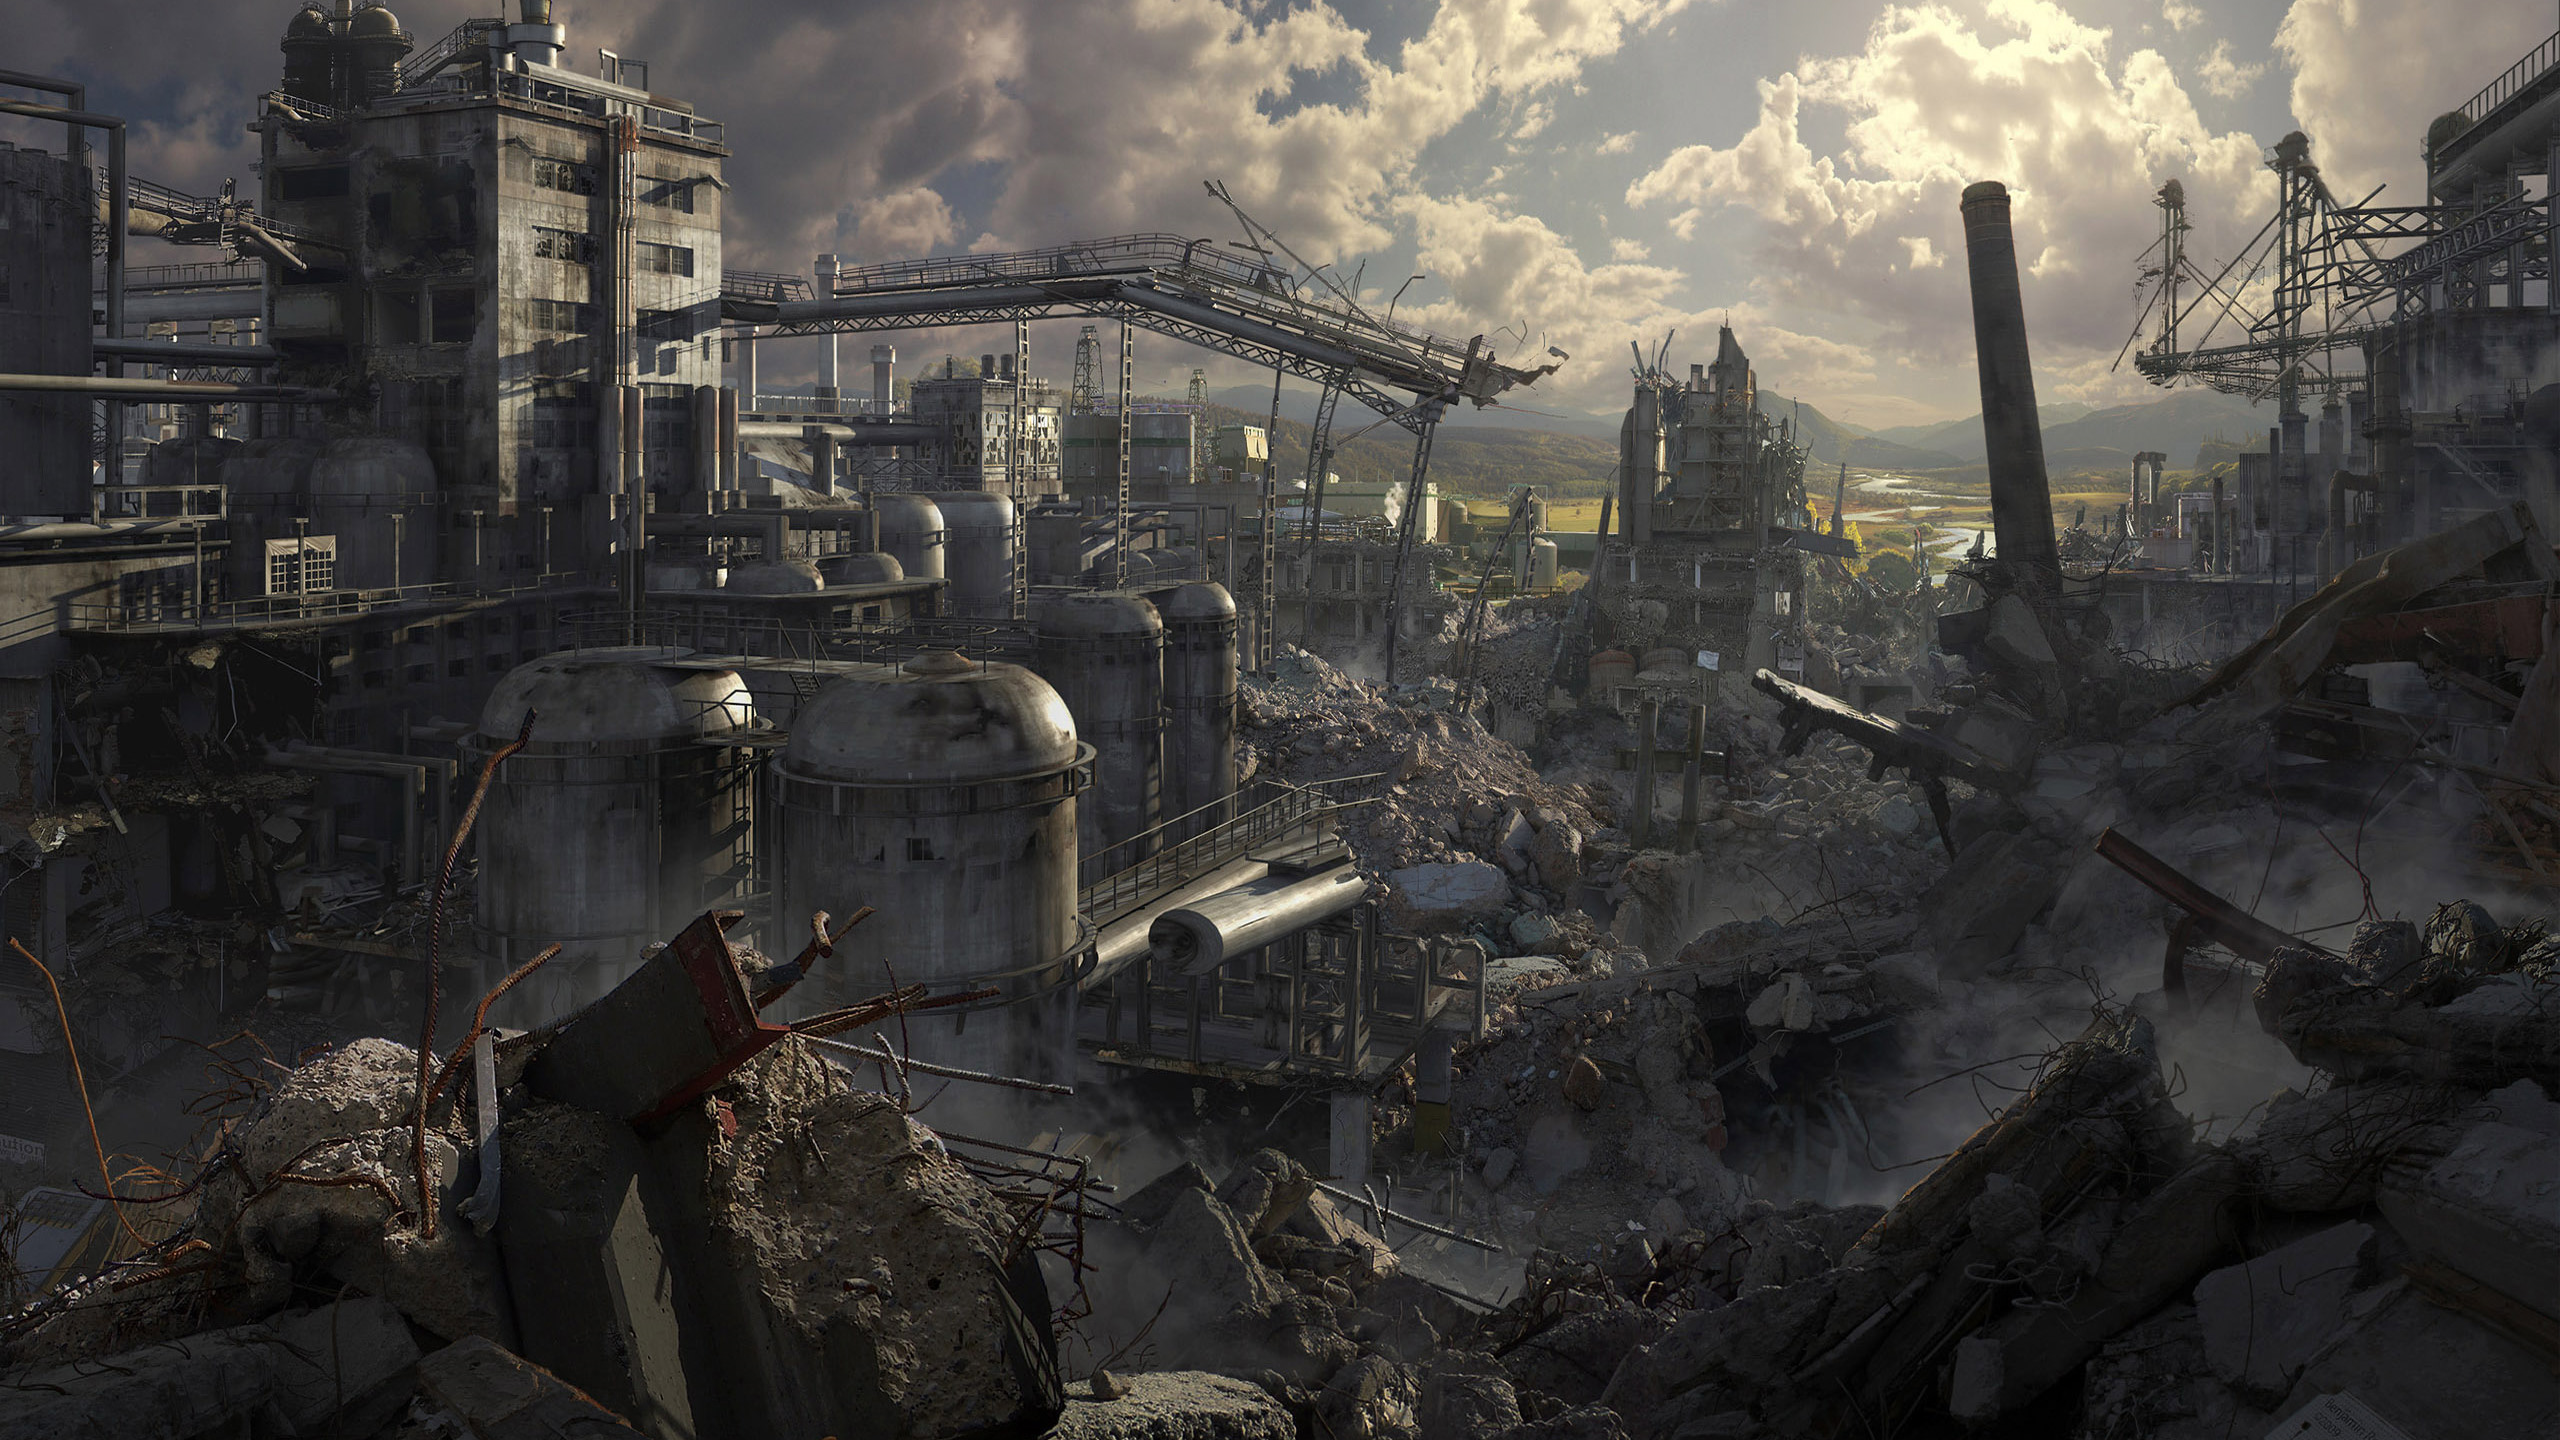 263 Post Apocalyptic HD Wallpapers | Backgrounds - Wallpaper Abyss